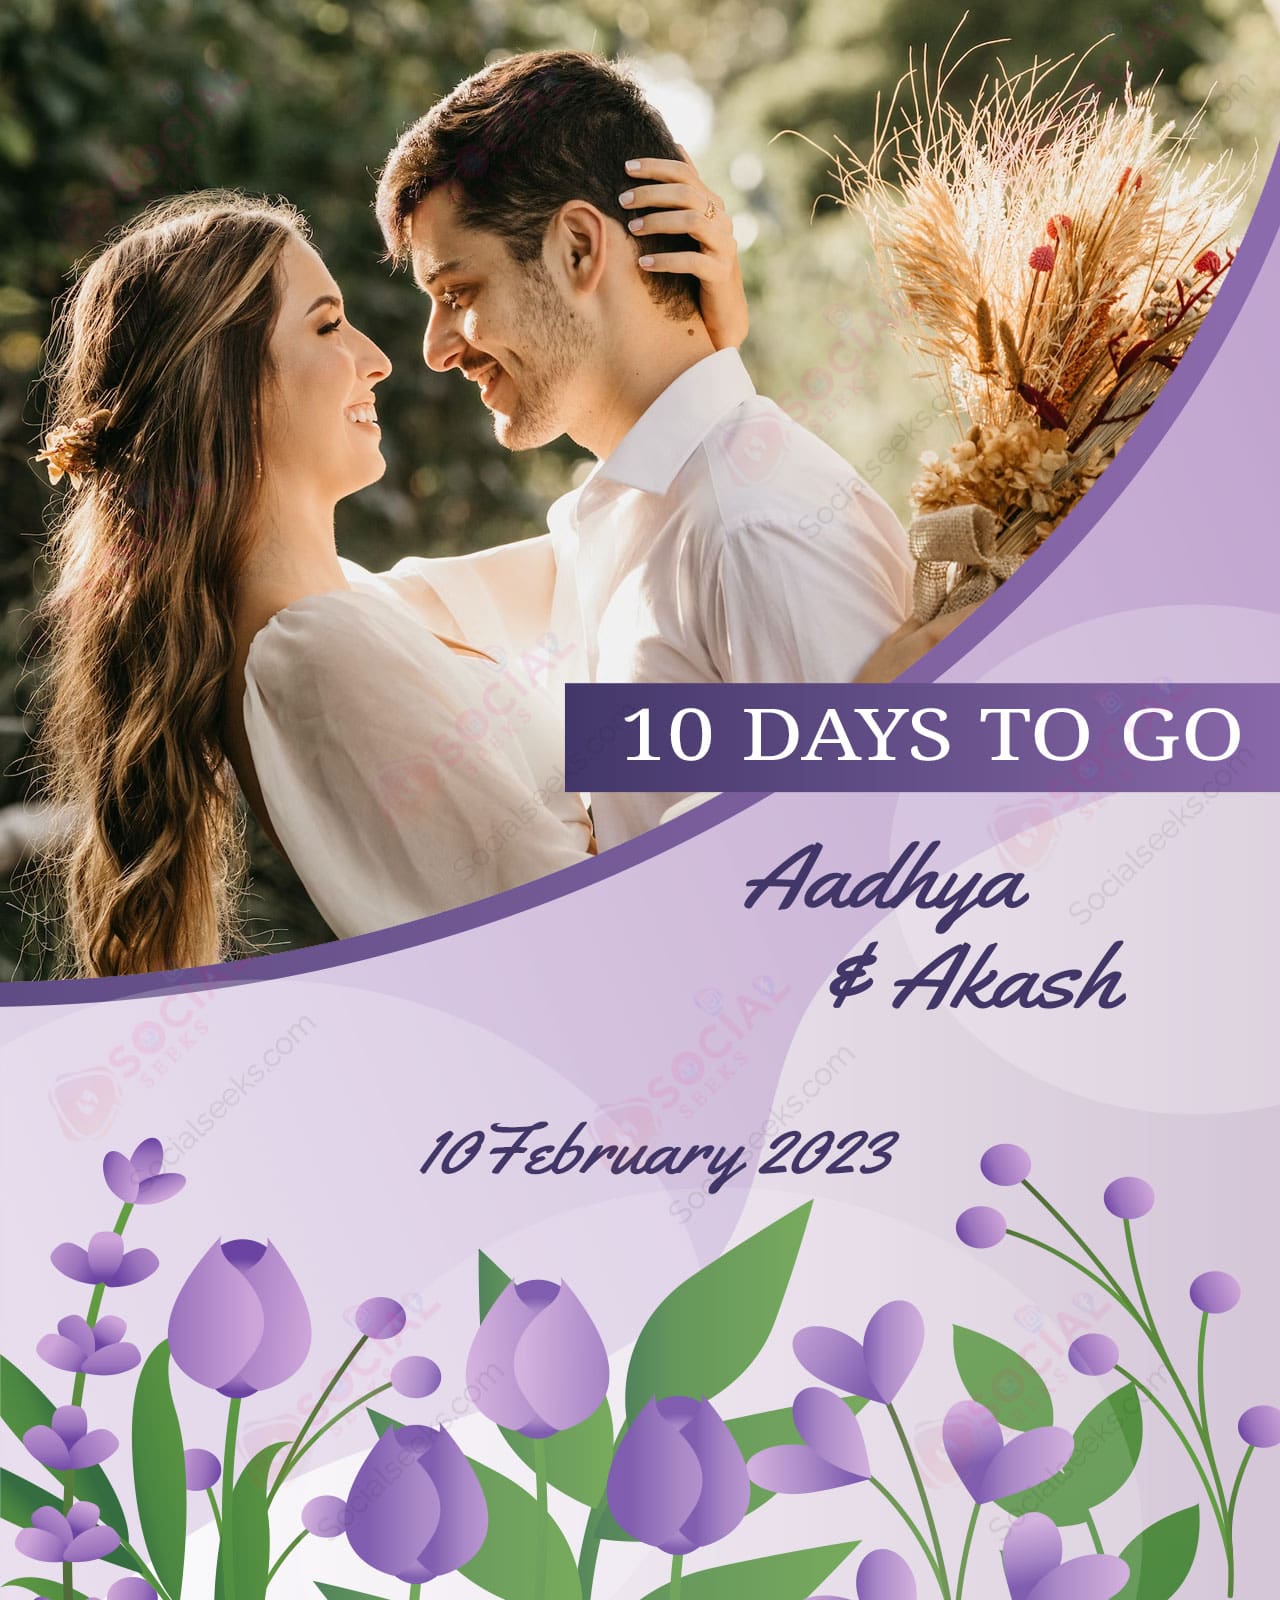 10 Days to go marriage countdown customised photo cards with couple name